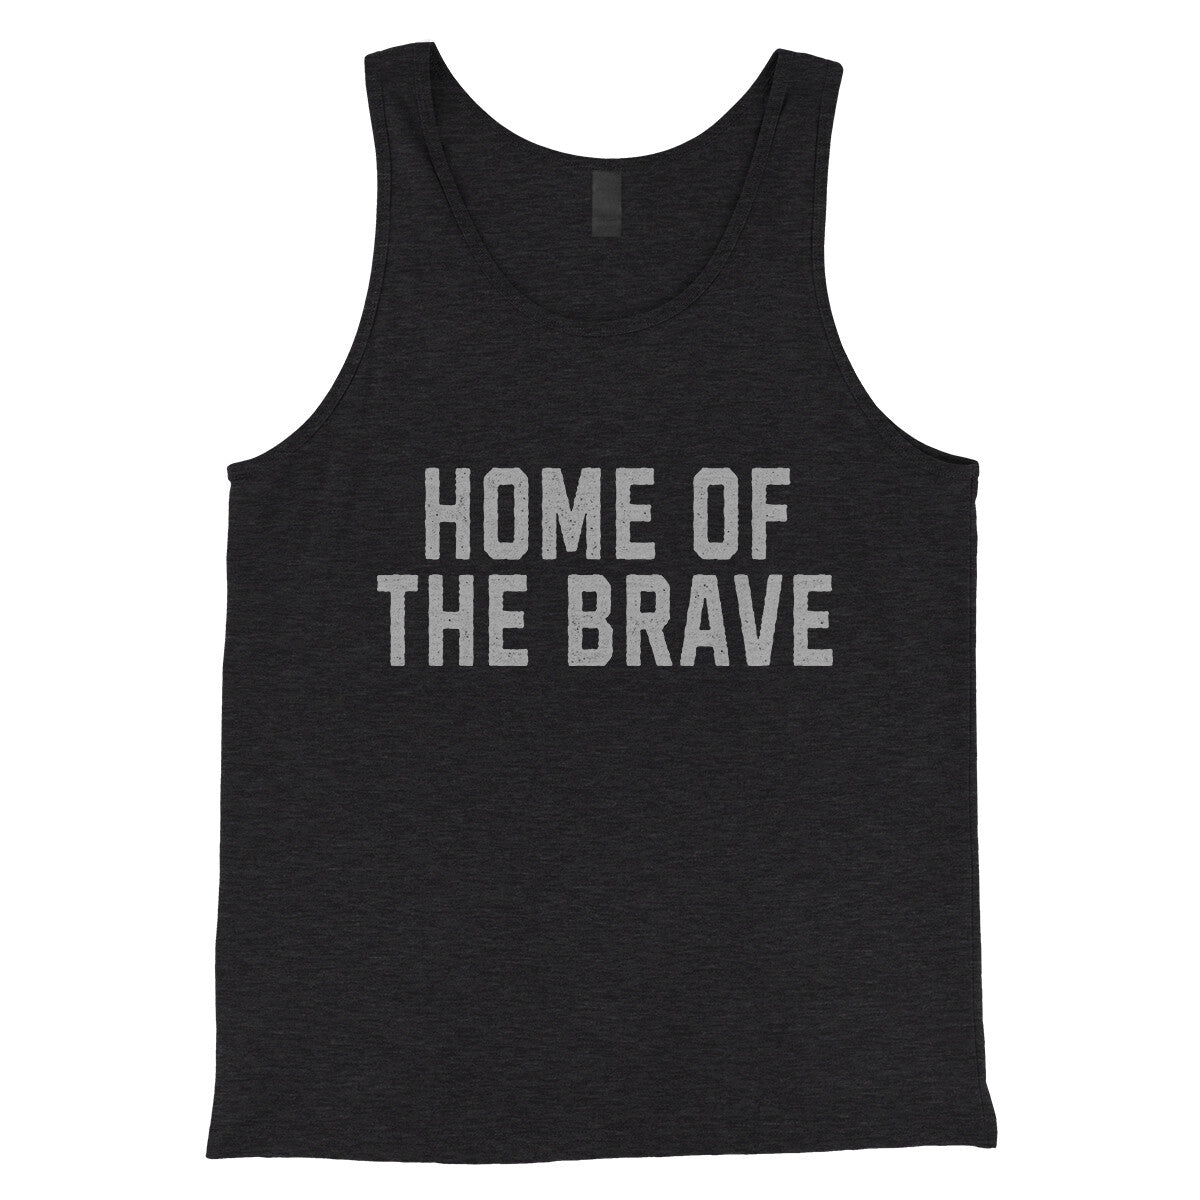 Home of the Brave in Charcoal Black TriBlend Color